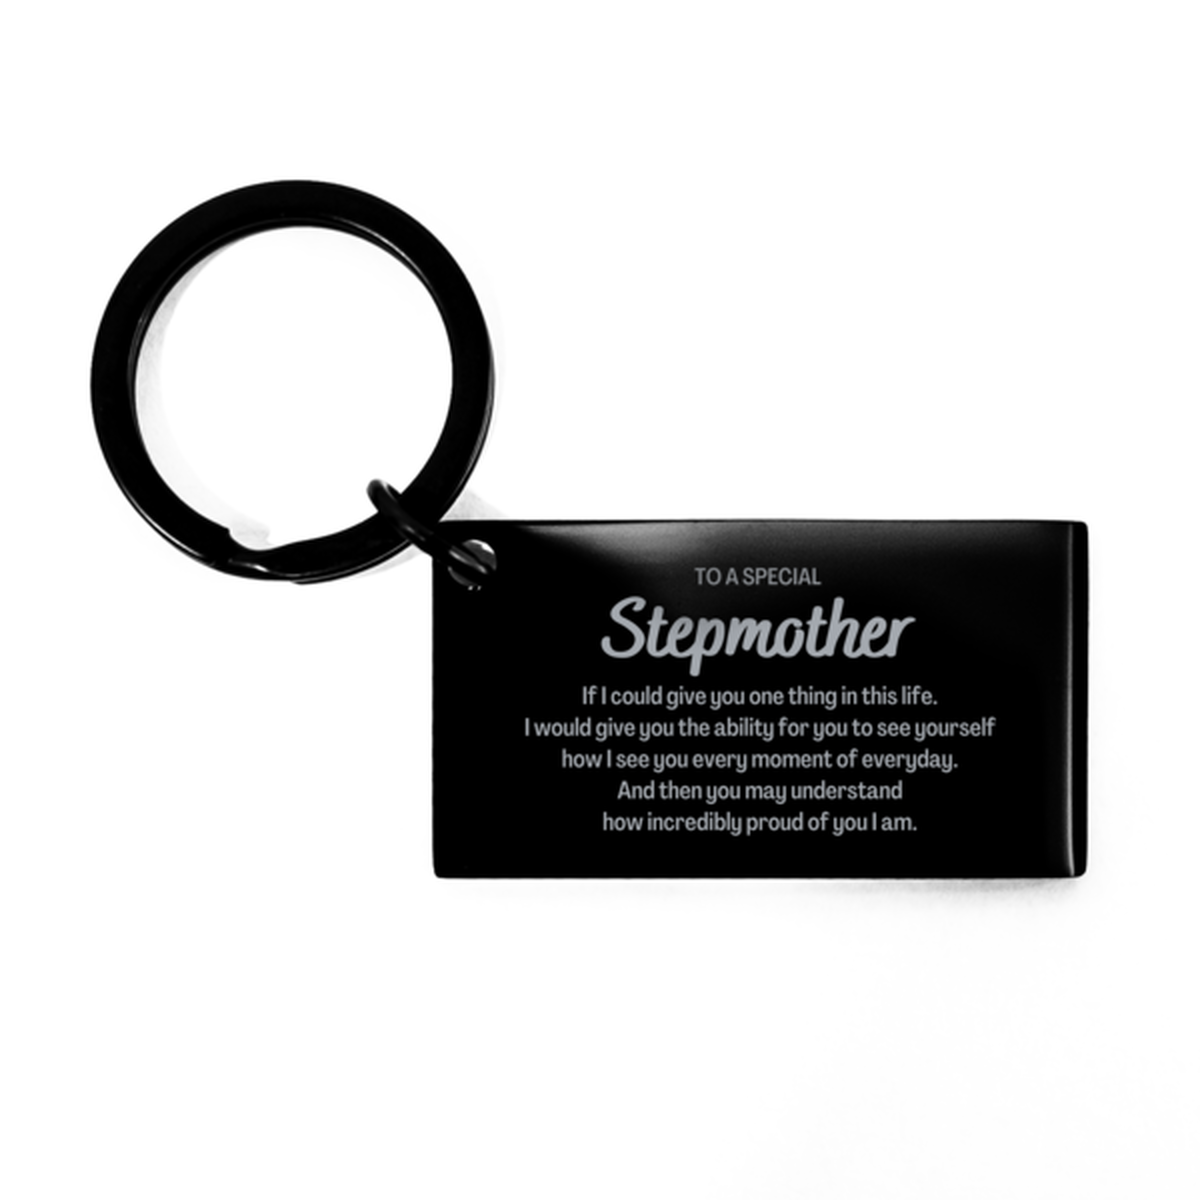 To My Stepmother Keychain, Gifts For Stepmother Engraved, Inspirational Gifts for Christmas Birthday, Epic Gifts for Stepmother To A Special Stepmother how incredibly proud of you I am